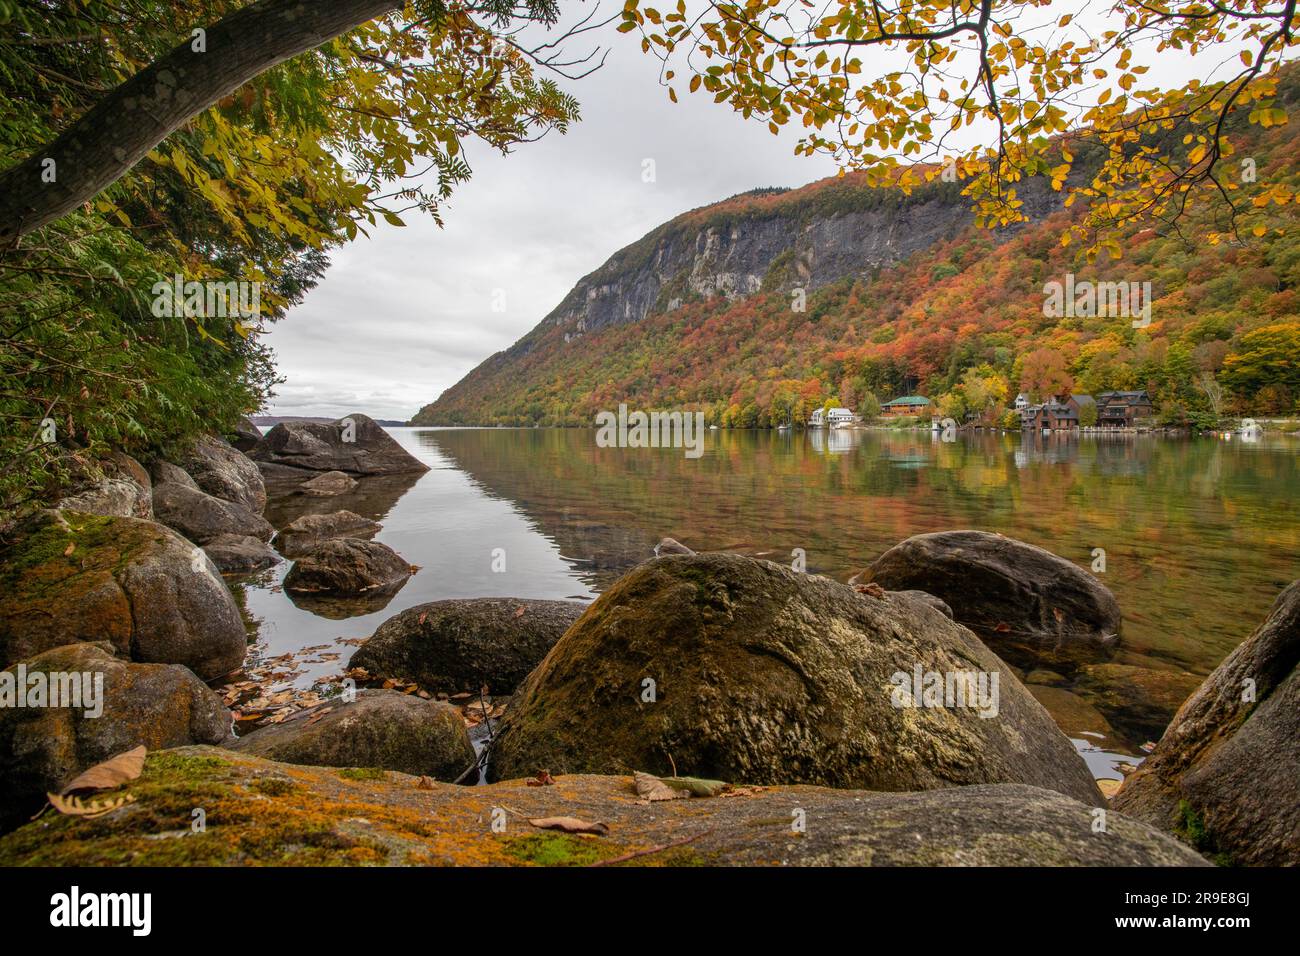 Westmore, Orleans County, VT, USA Stockfoto